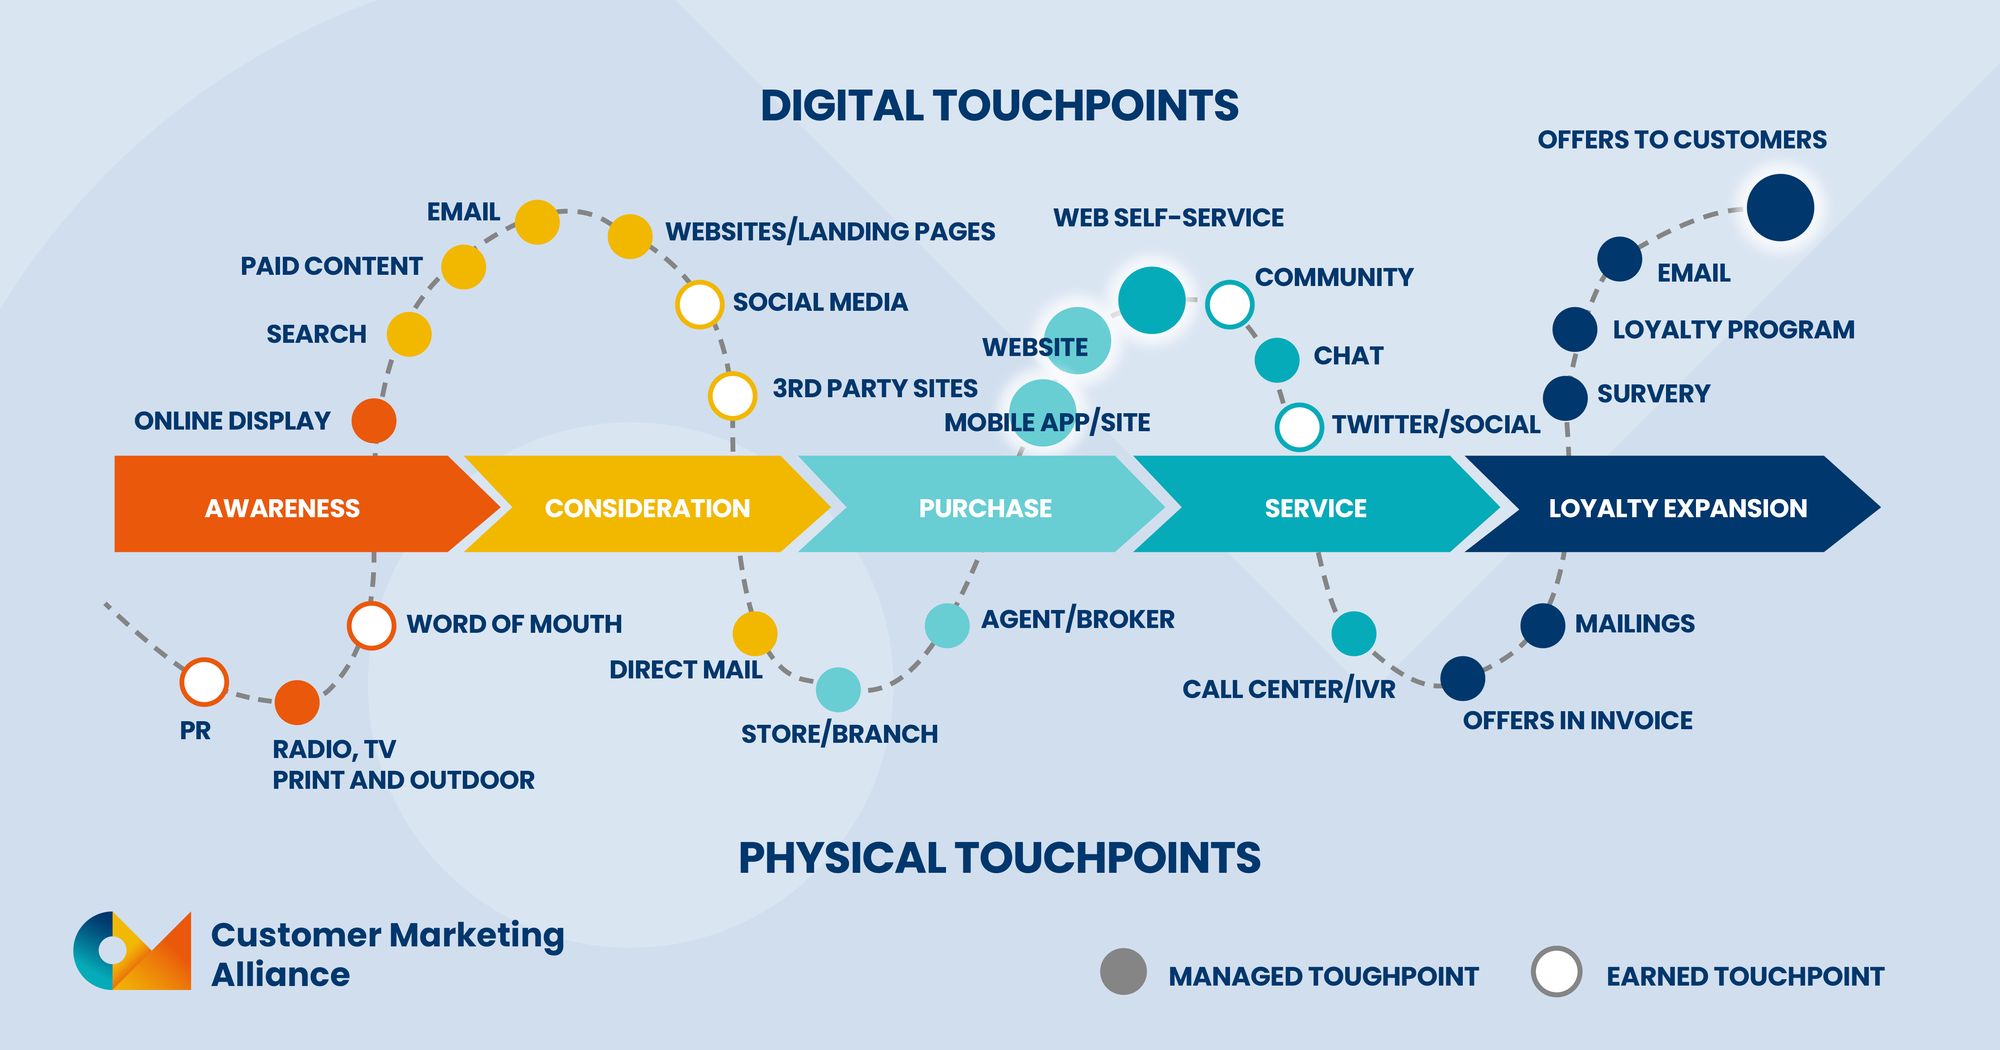 Flow diagram detailing the digital touchpoints and physical touchpoints of a customer journey from awareness to loyalty expansion